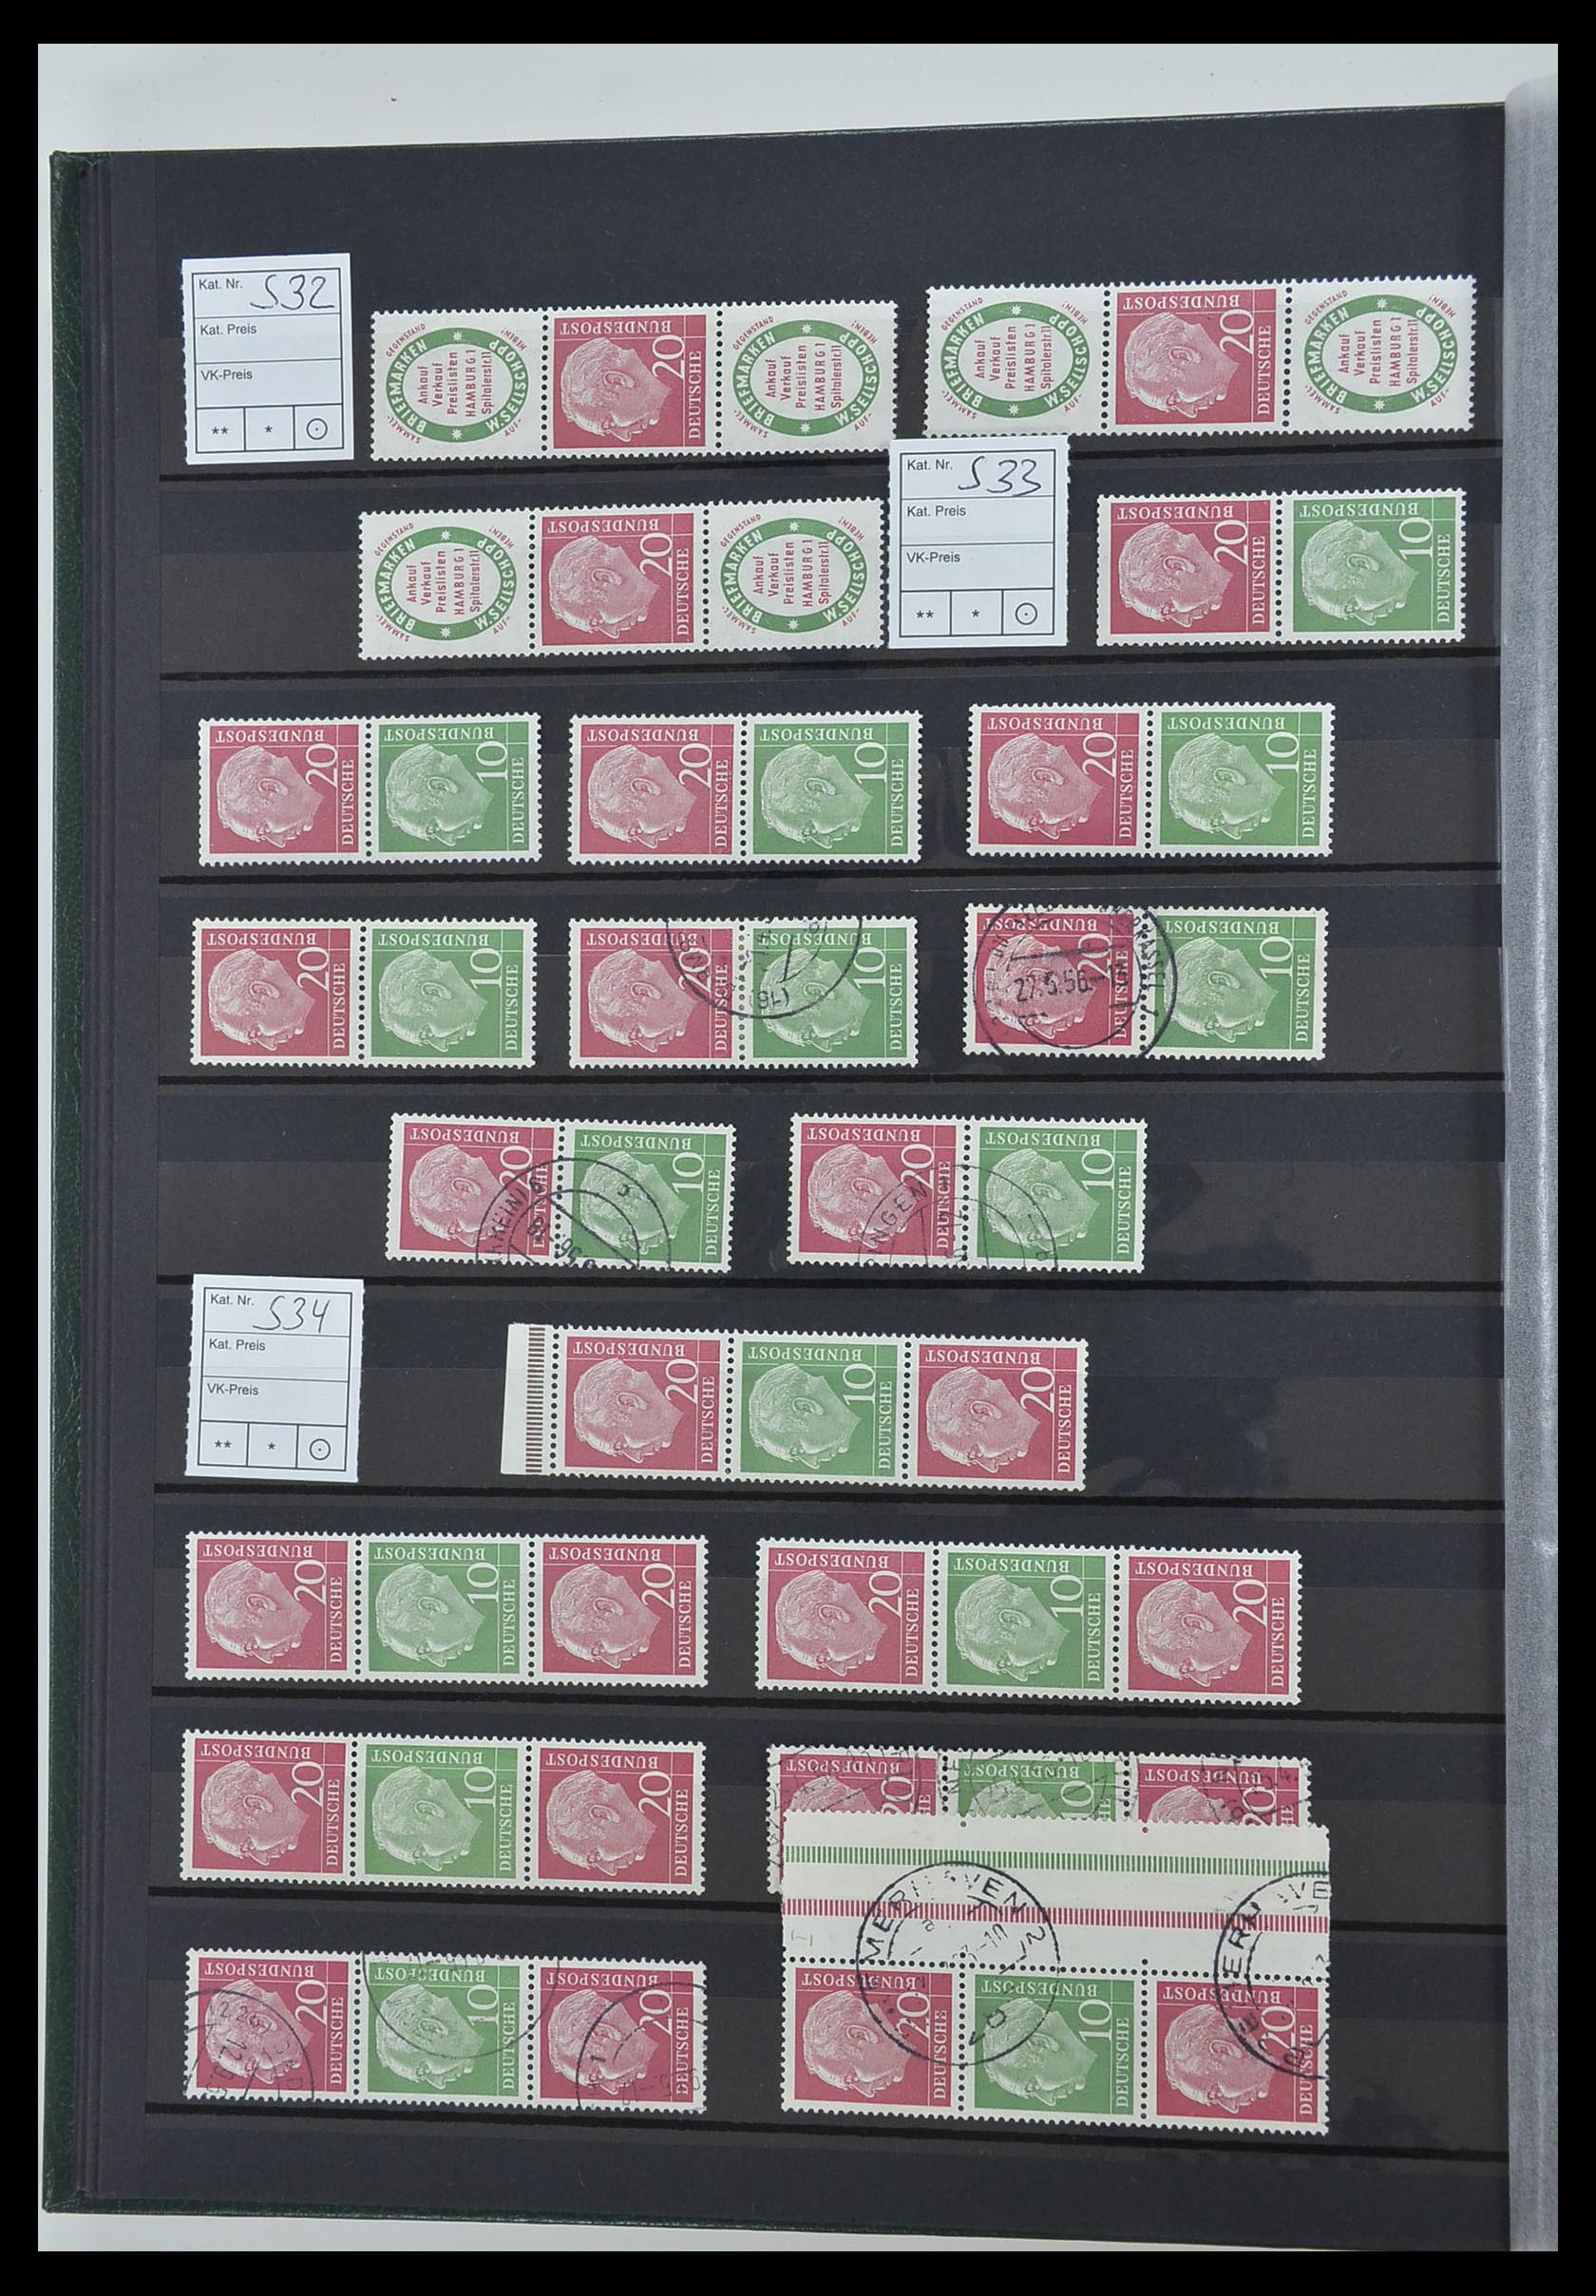 33275 012 - Stamp collection 33275 Bundespost combinations 1951-1960.